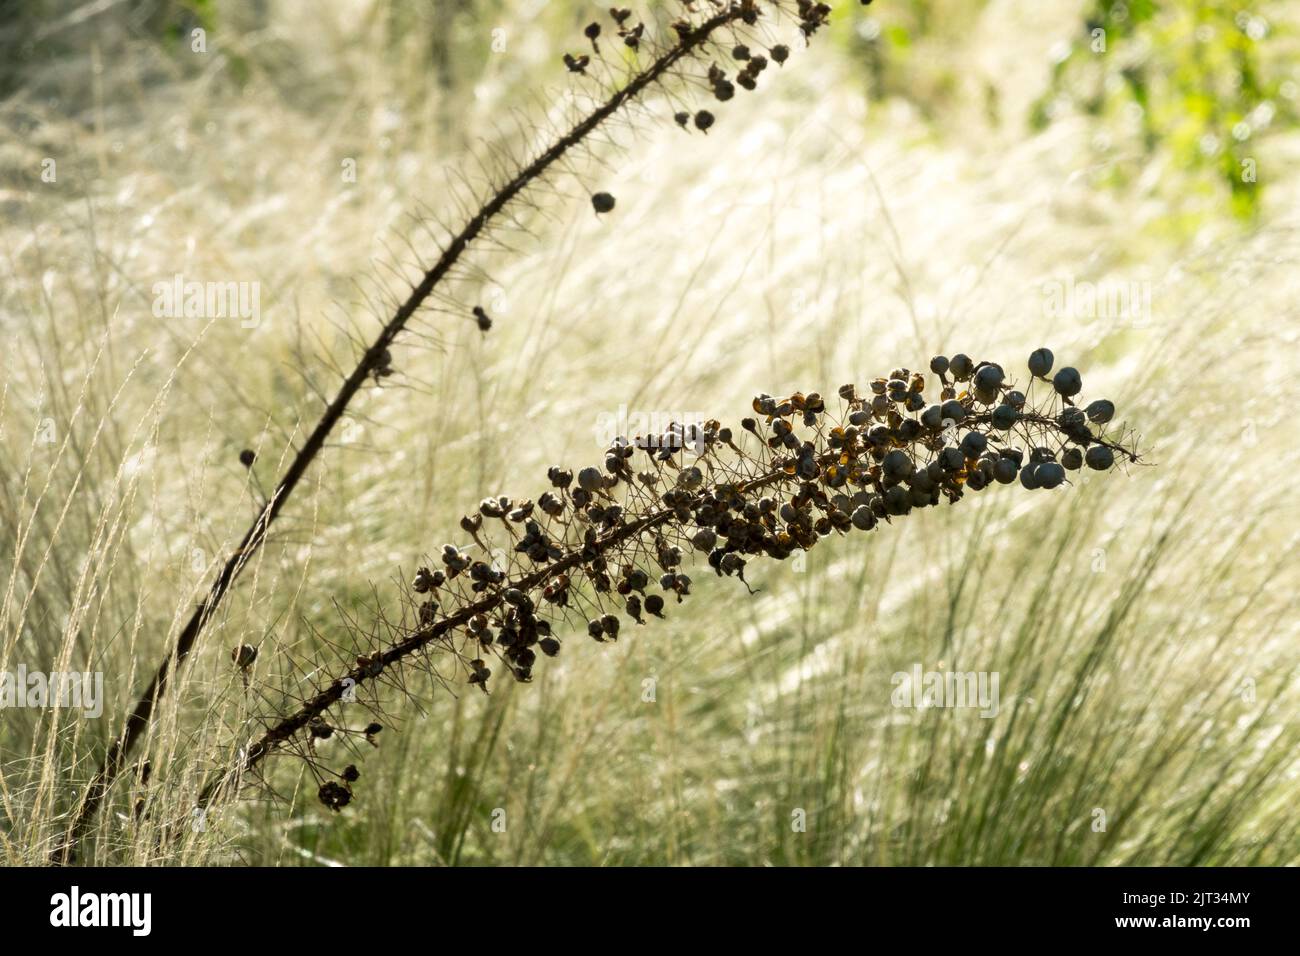 Desert Candle, Seed head, Foxtail Lily, Seeds, Eremurus, Pods Ripe Seed heads, Ponytail Grass background Stock Photo